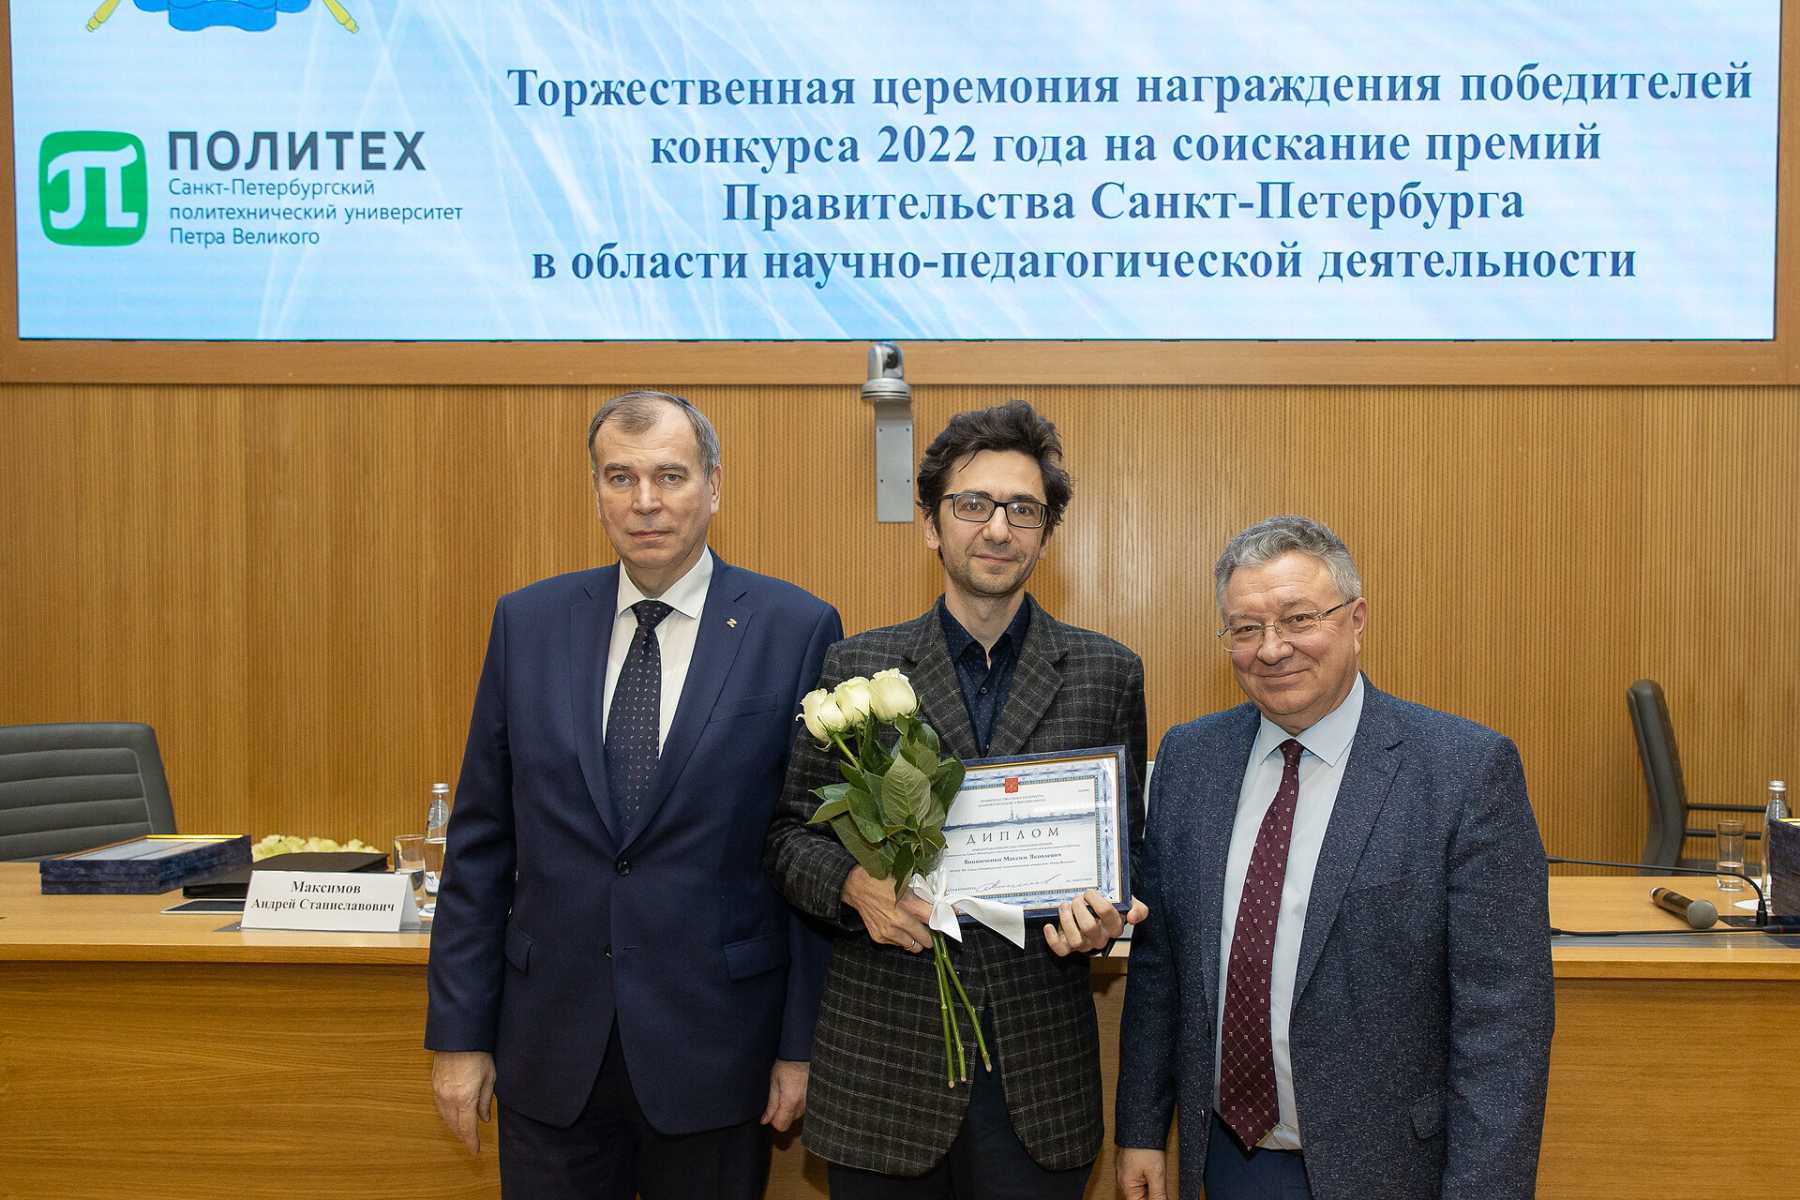 The award of the Government of St. Petersburg is ours again